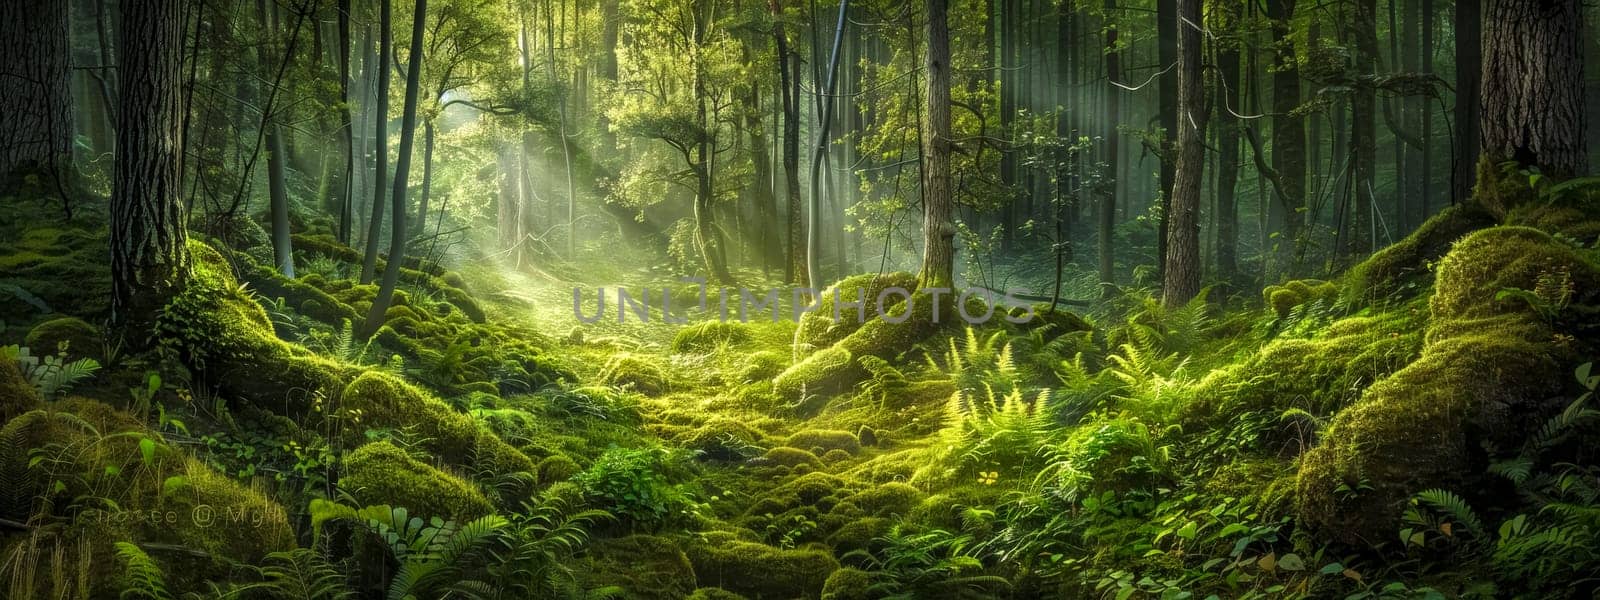 Tranquil and mystical enchanted forest with lush greenery. Moss-covered floor by Edophoto